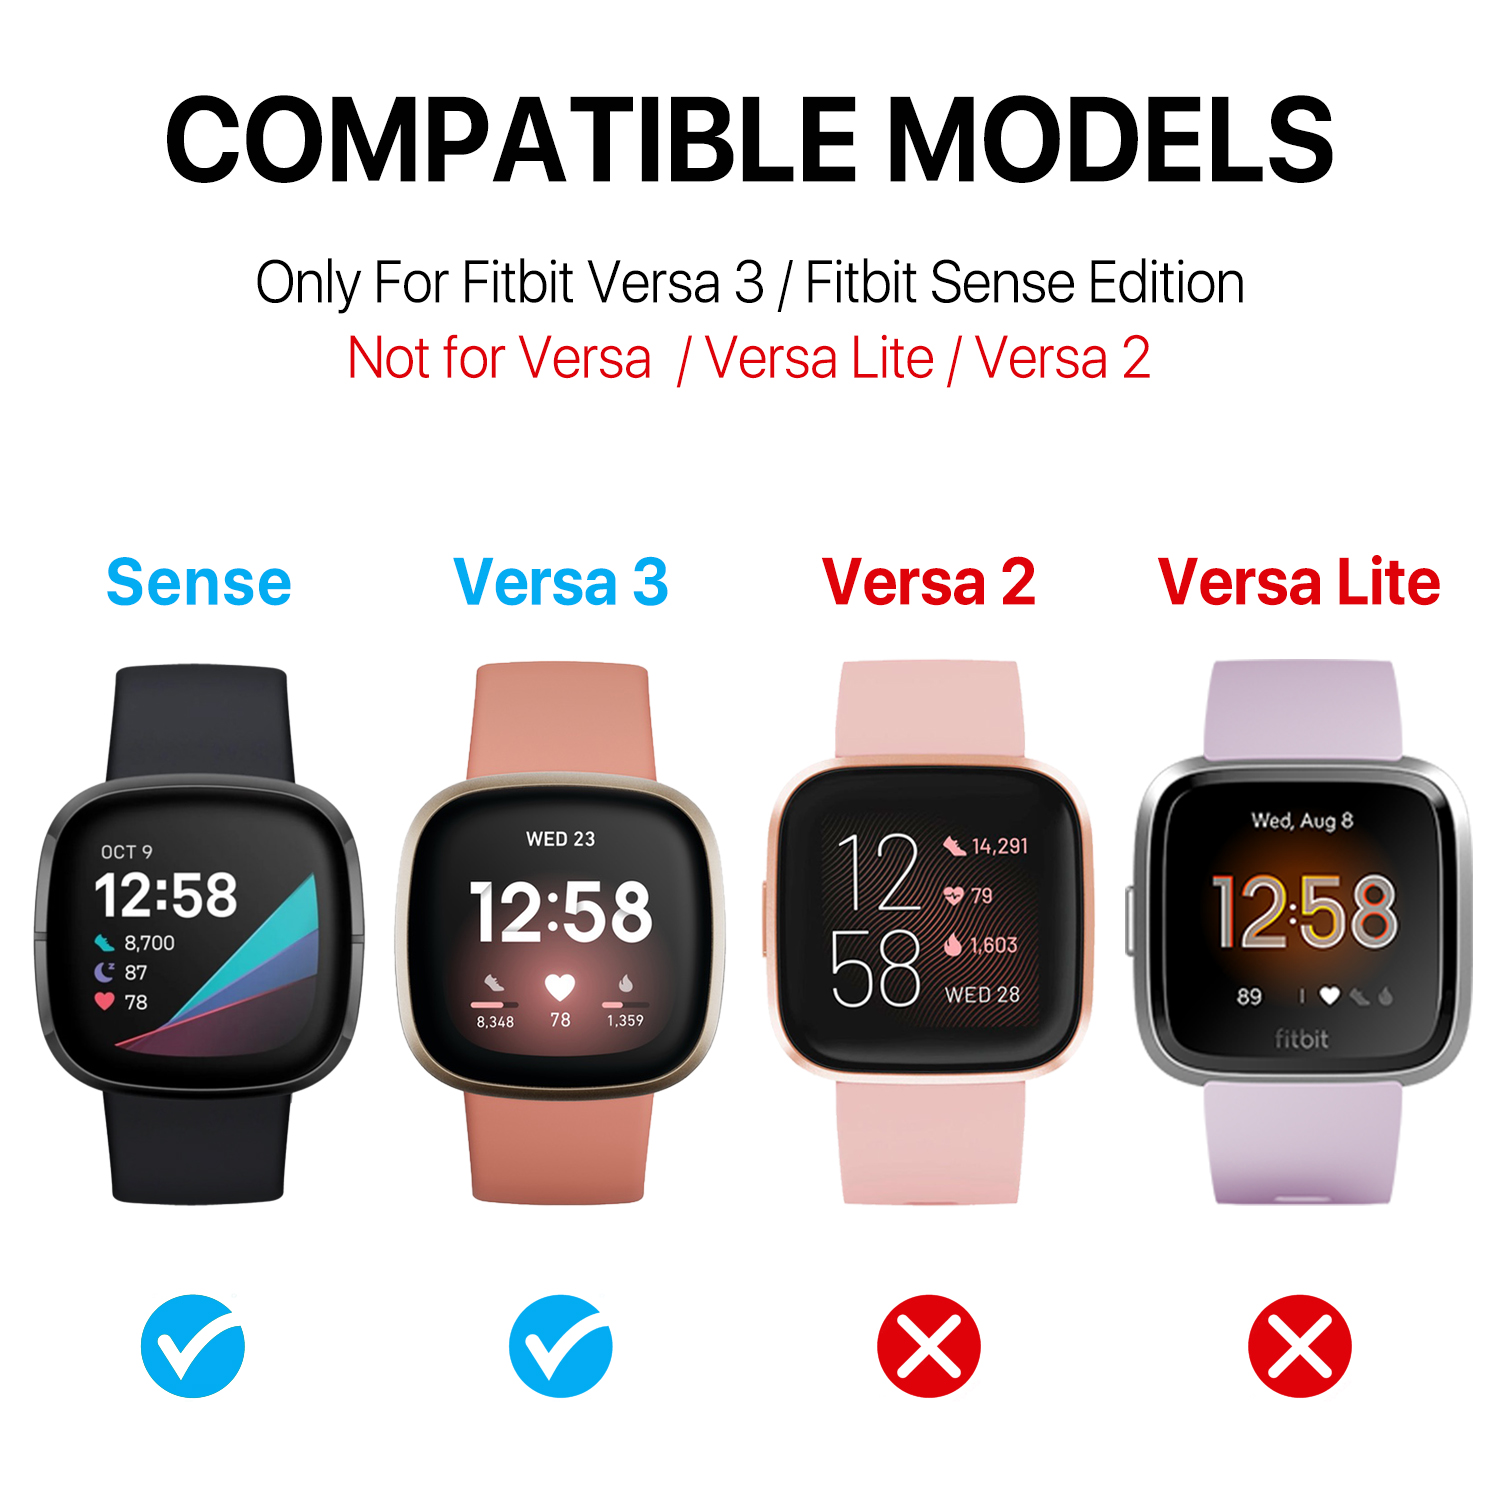 fitbit versa 3 charger